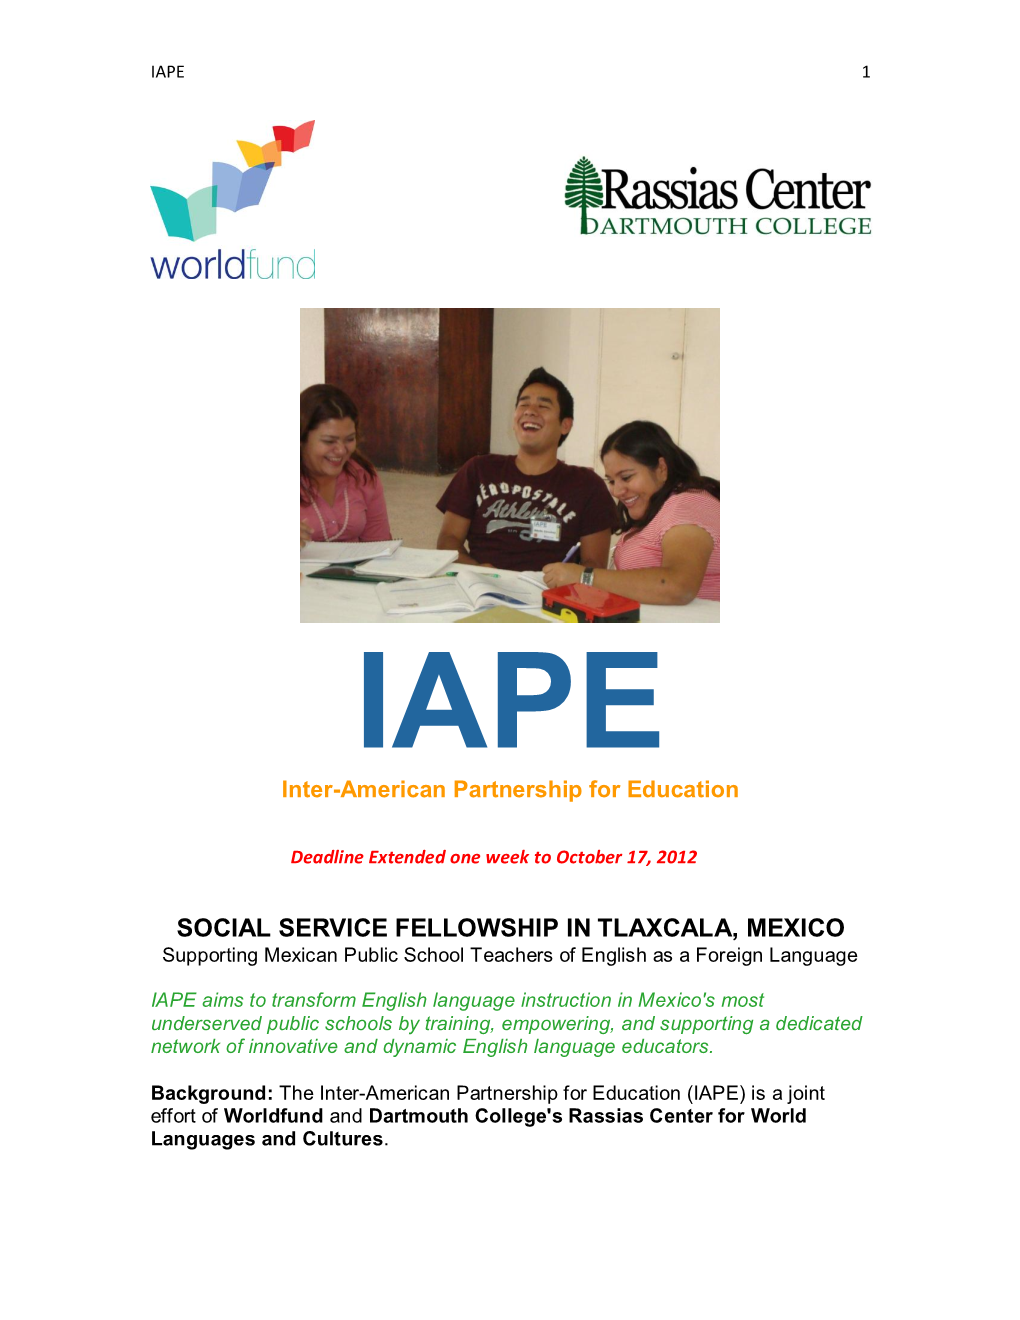 SOCIAL SERVICE FELLOWSHIP in TLAXCALA, MEXICO Supporting Mexican Public School Teachers of English As a Foreign Language